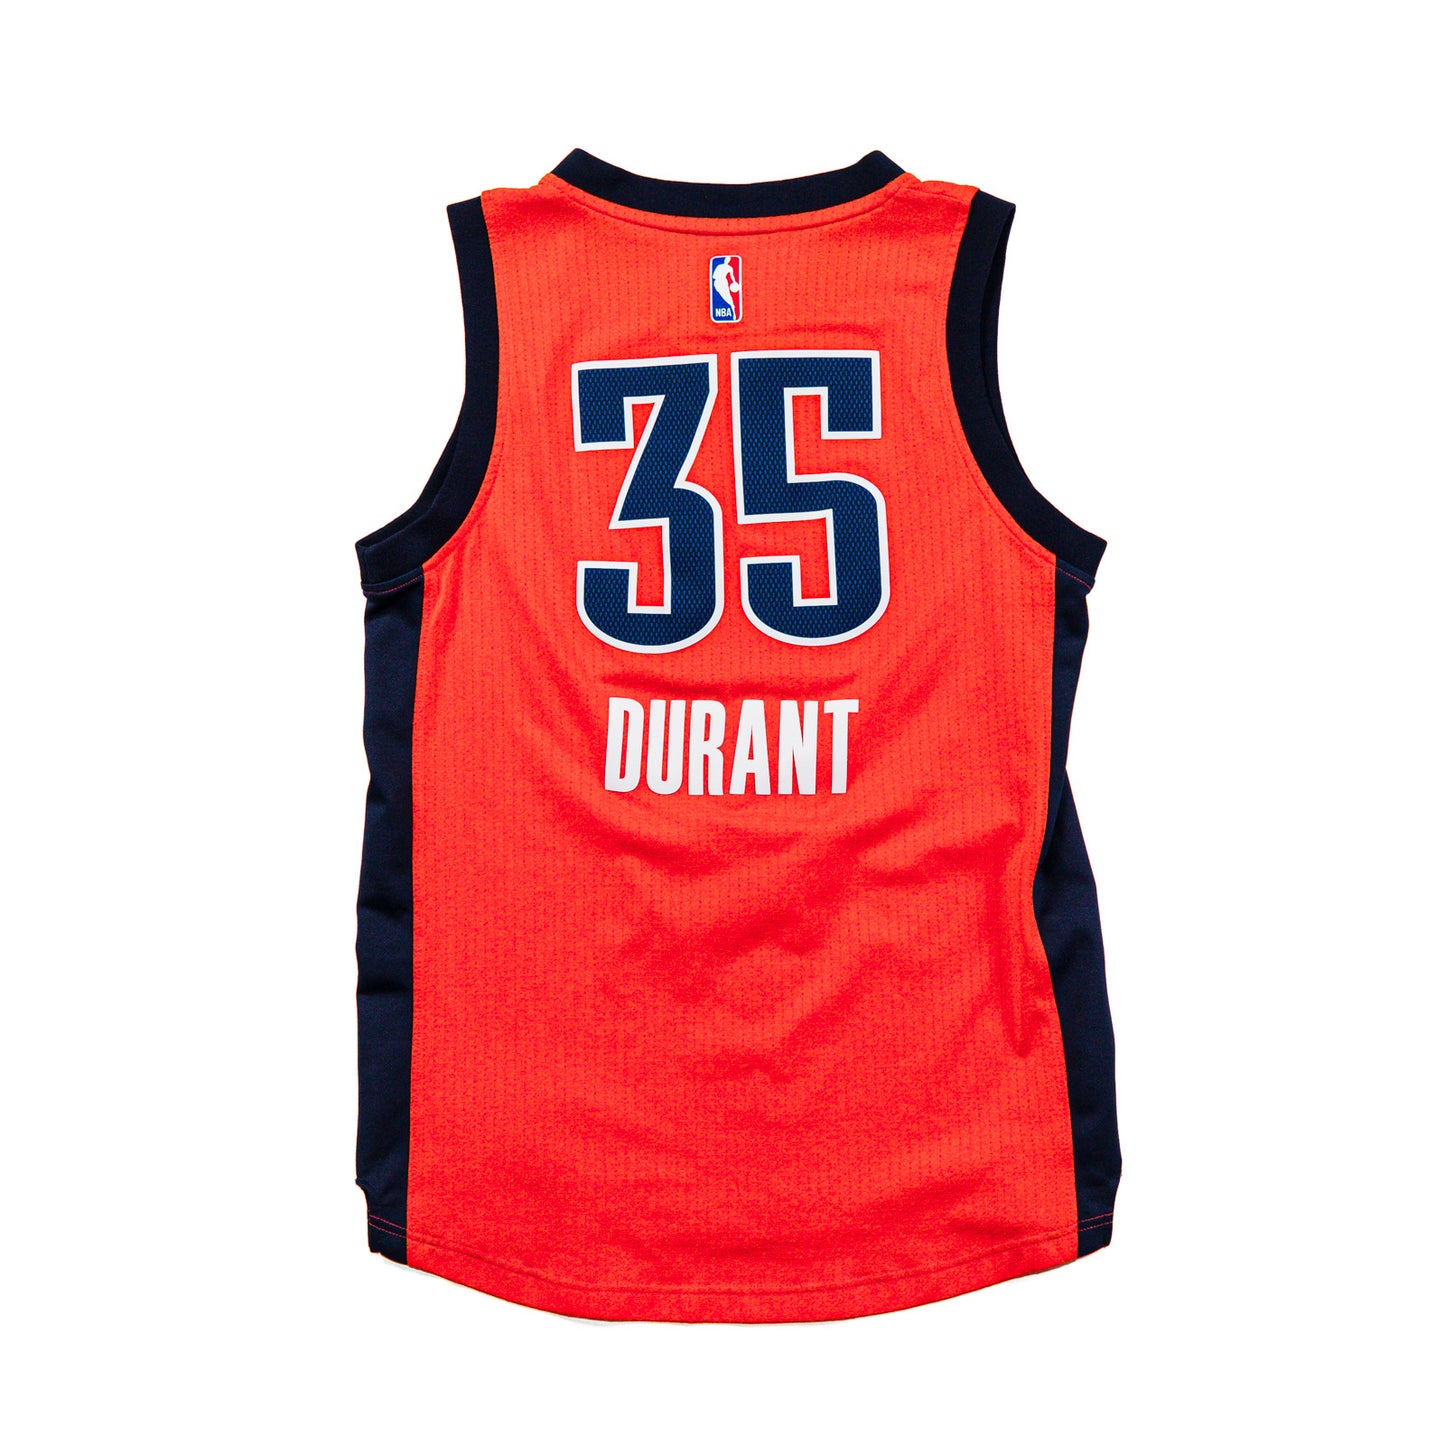 OKC Kevin Durant Jersey (S)